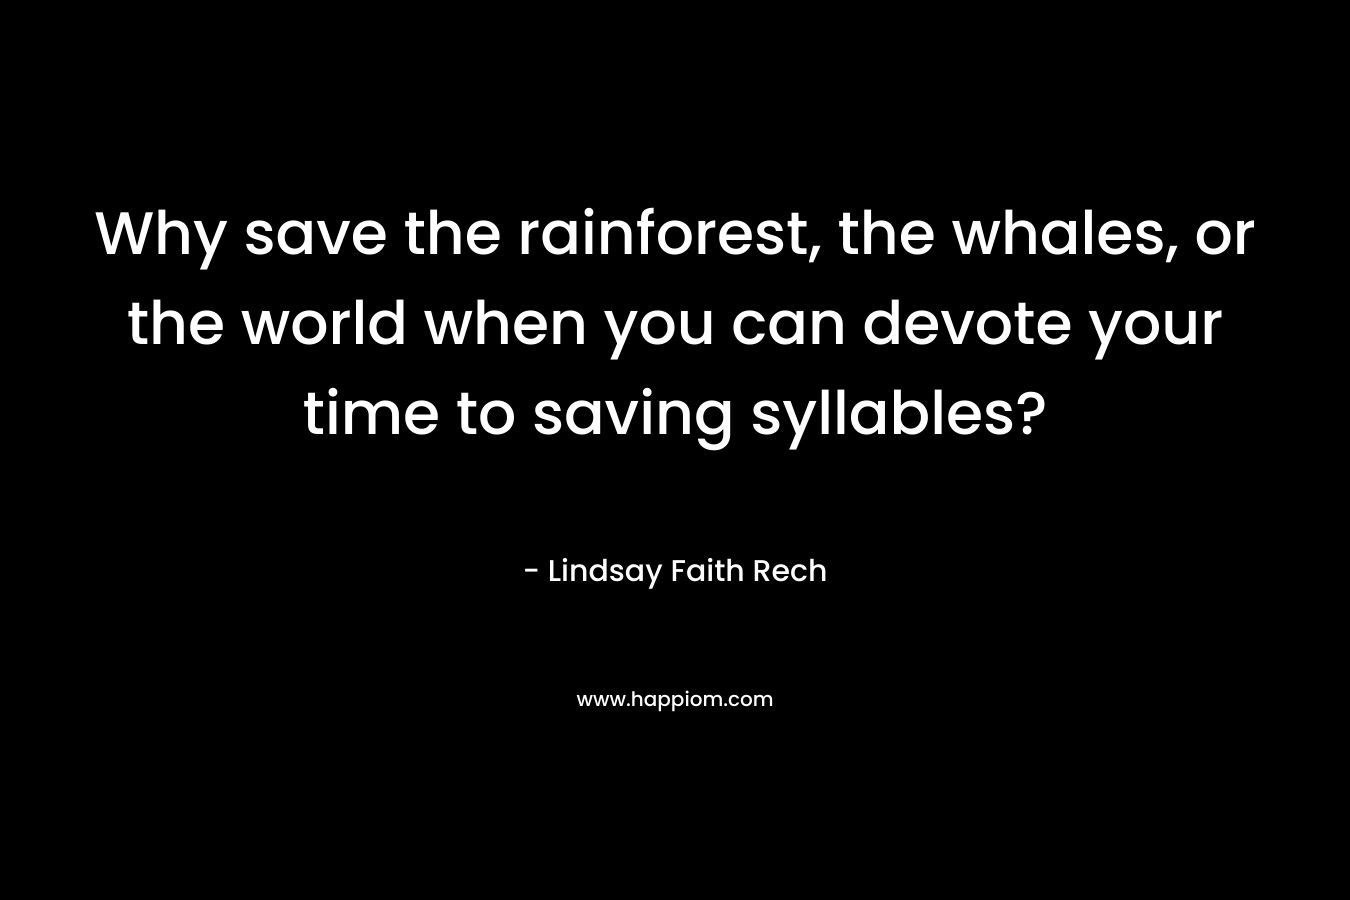 Why save the rainforest, the whales, or the world when you can devote your time to saving syllables? – Lindsay Faith Rech